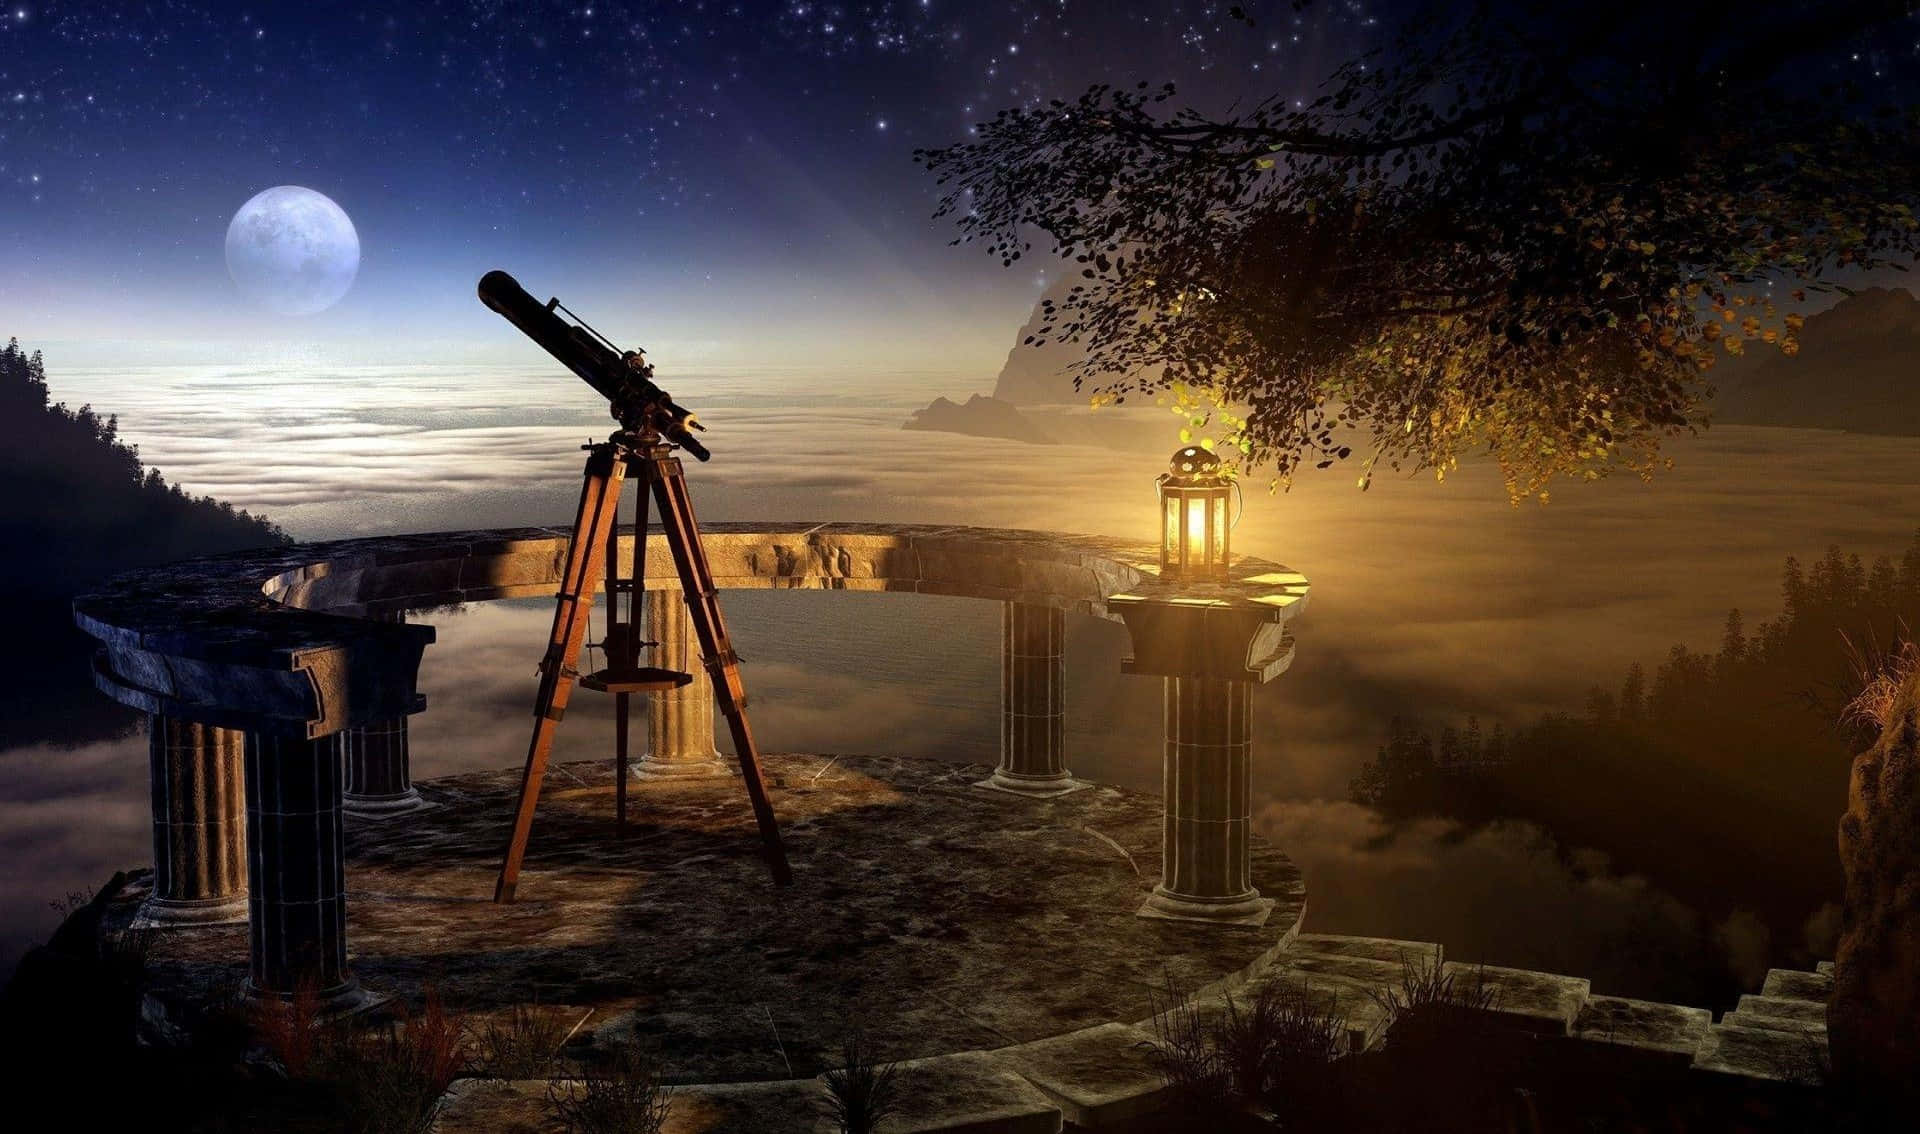 A vintage telescope in front of a starry night sky.